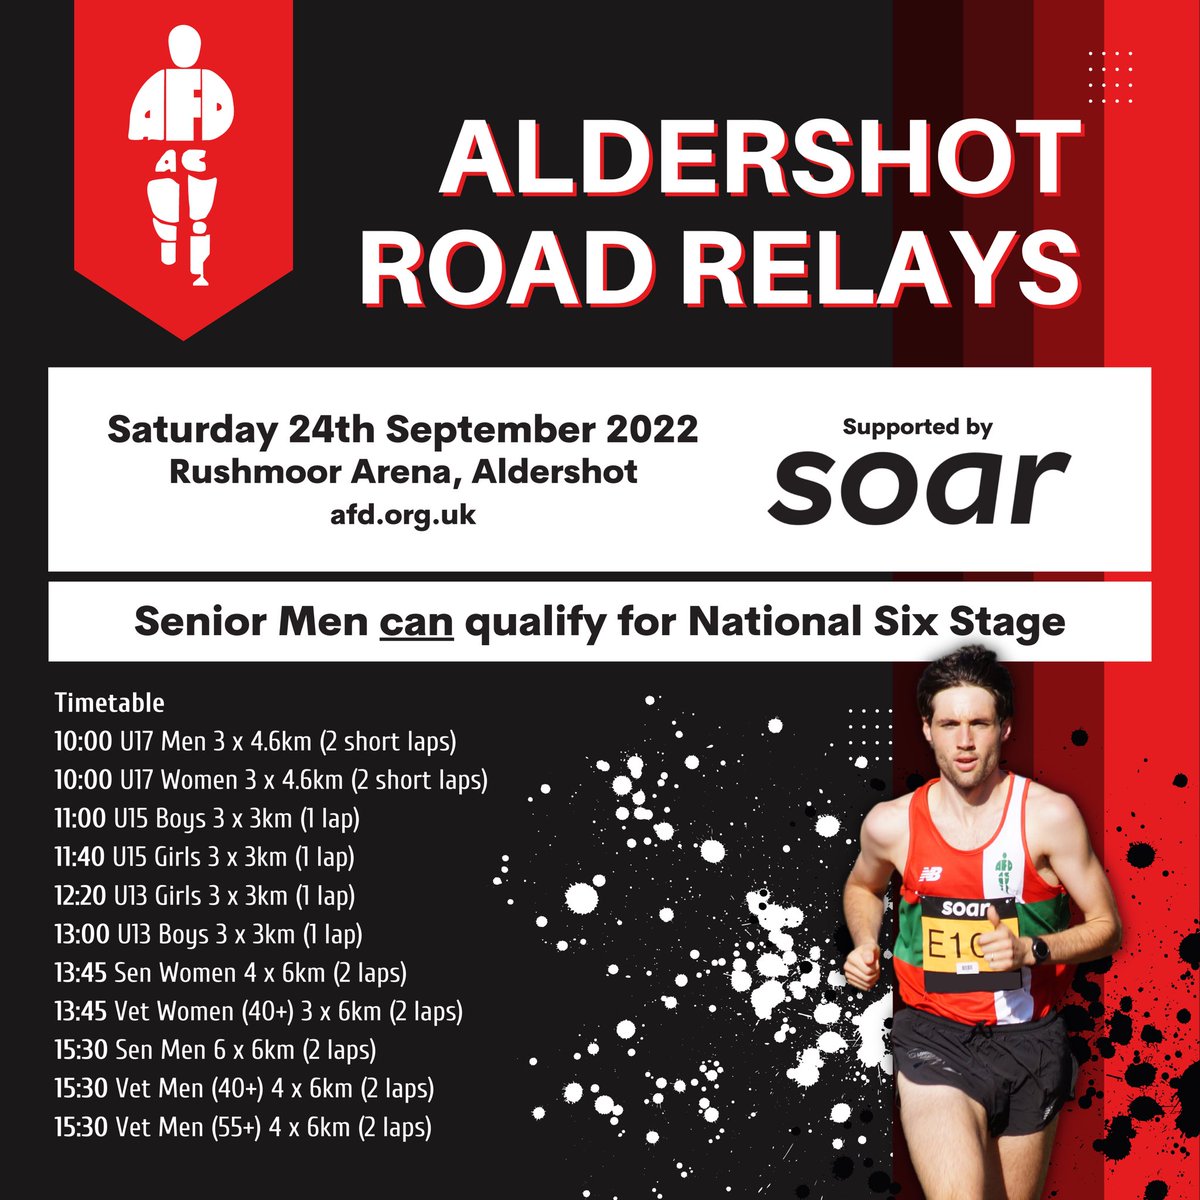 🚨 It’s back! Road running returns to Rushmoor Arena. The Aldershot Road Relays will take place on Saturday 24th September. More info at afd.org.uk